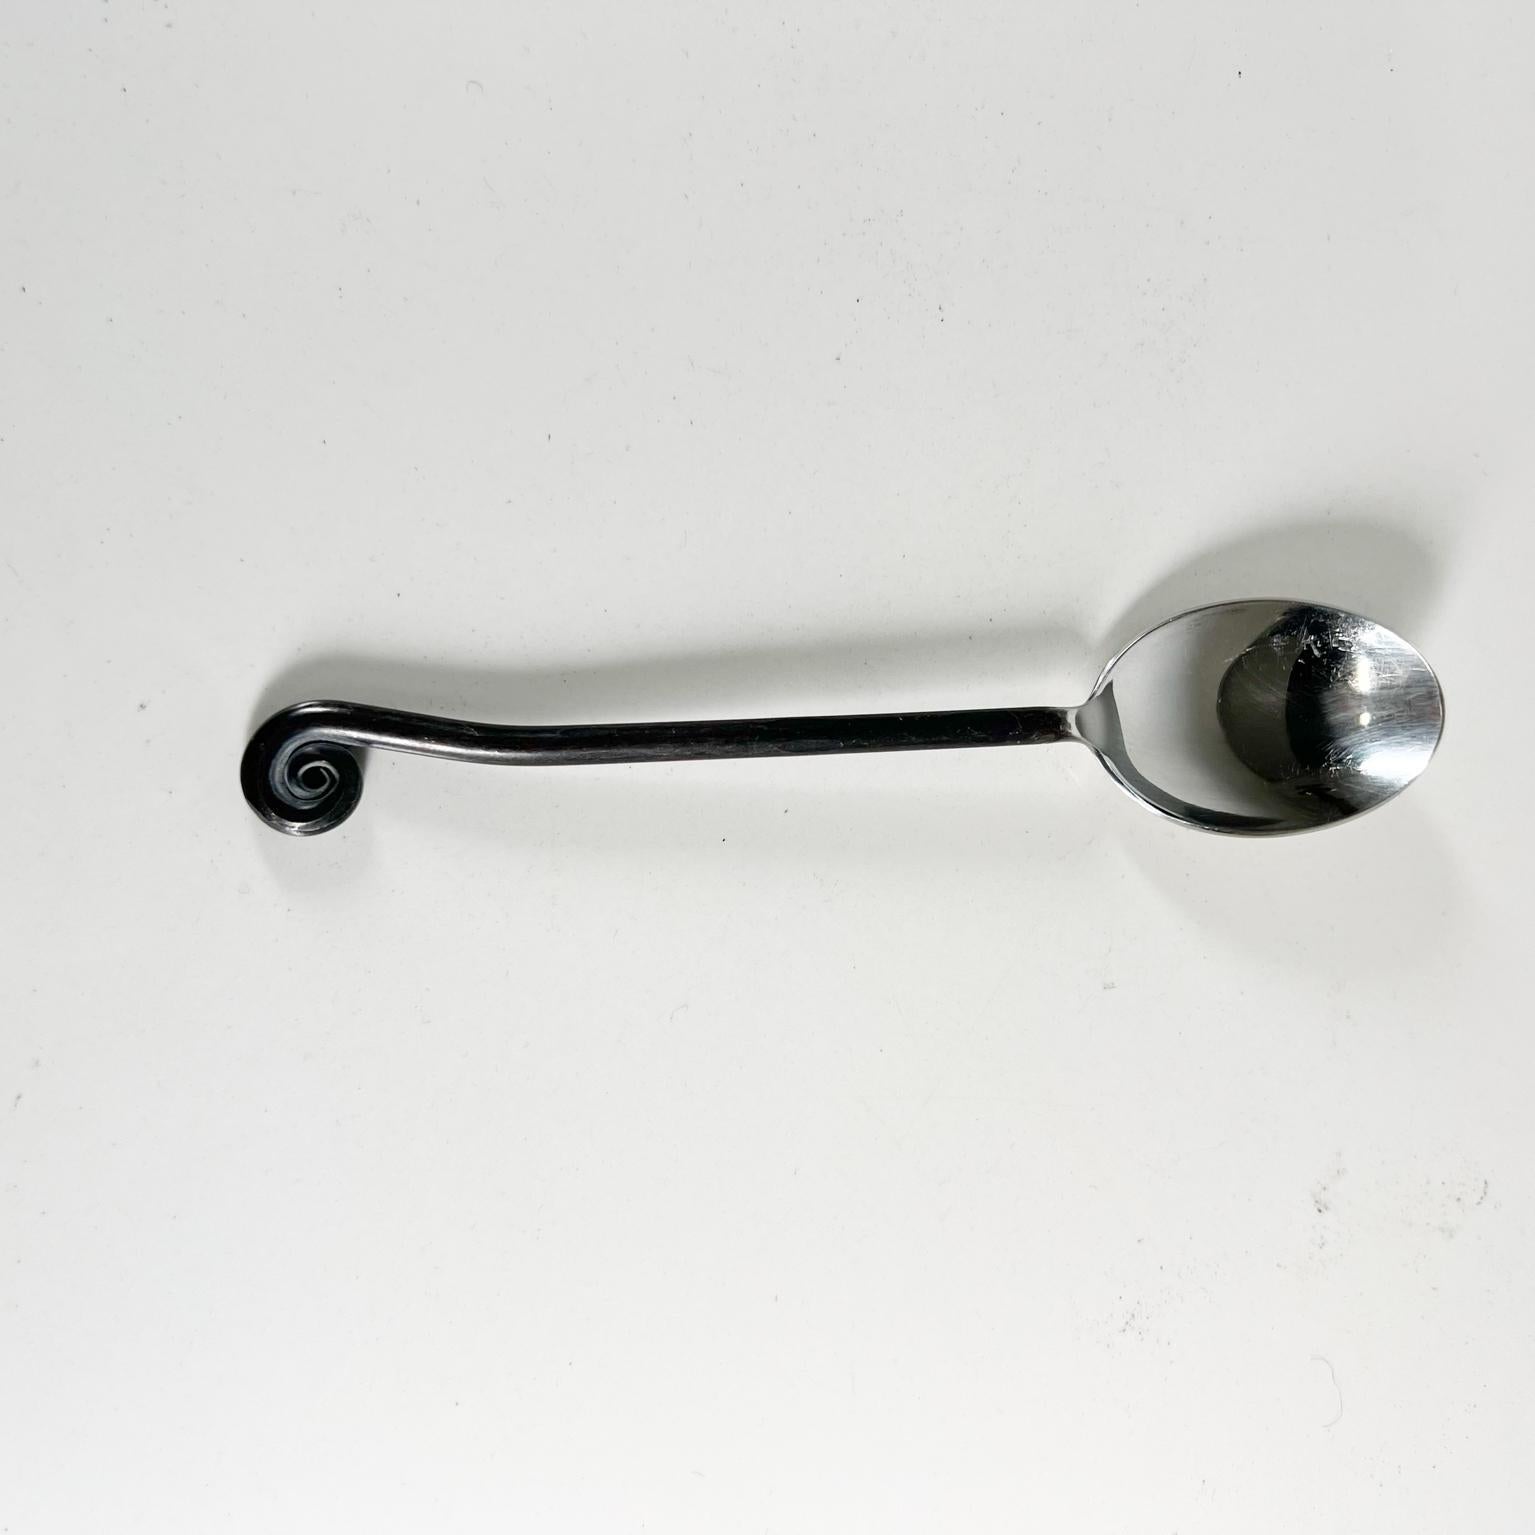 Ambianic presents.

Gourmet settings modern design sculptural treble clef spoon stainless steel flatware.
Maker stamped.
Measures: 7.25 long x 1.5 w x .25 tall.
Preowned unrestored original vintage.
See Images provided.

